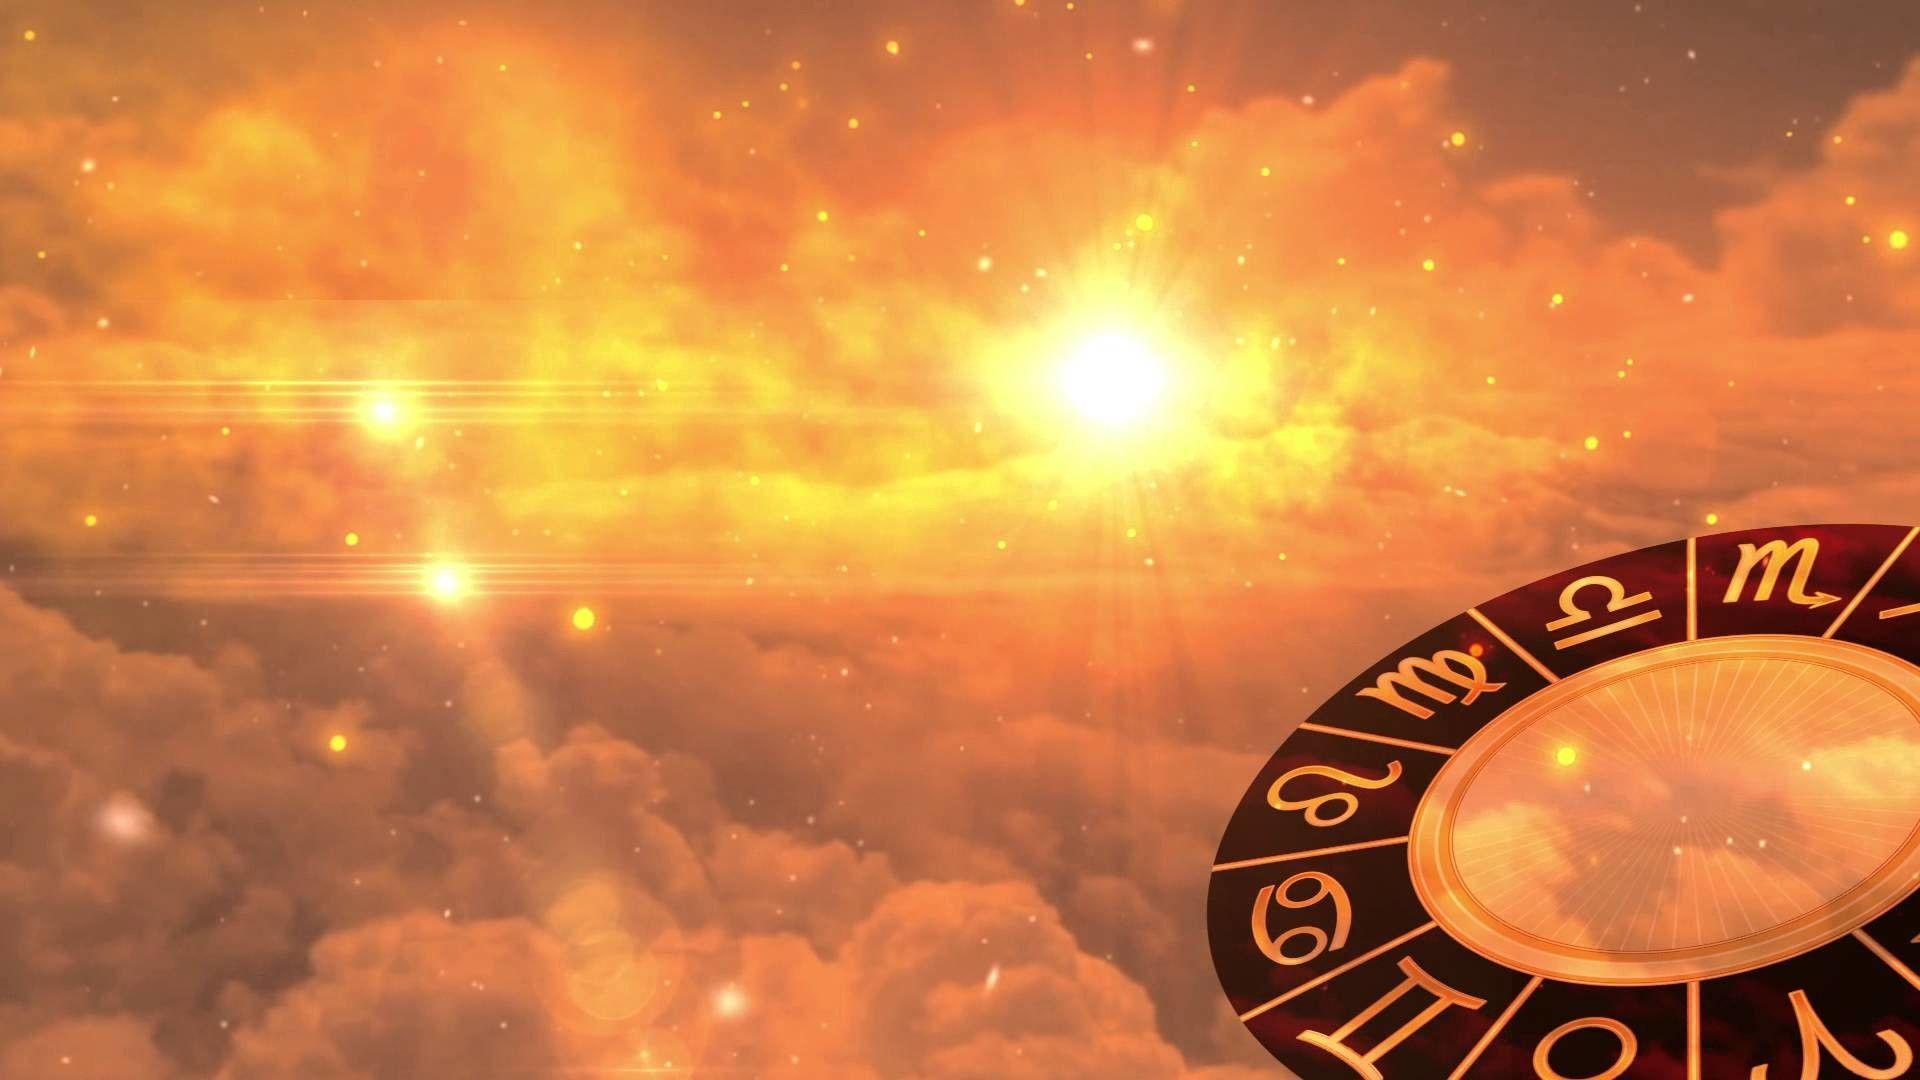 astrology images hd free download